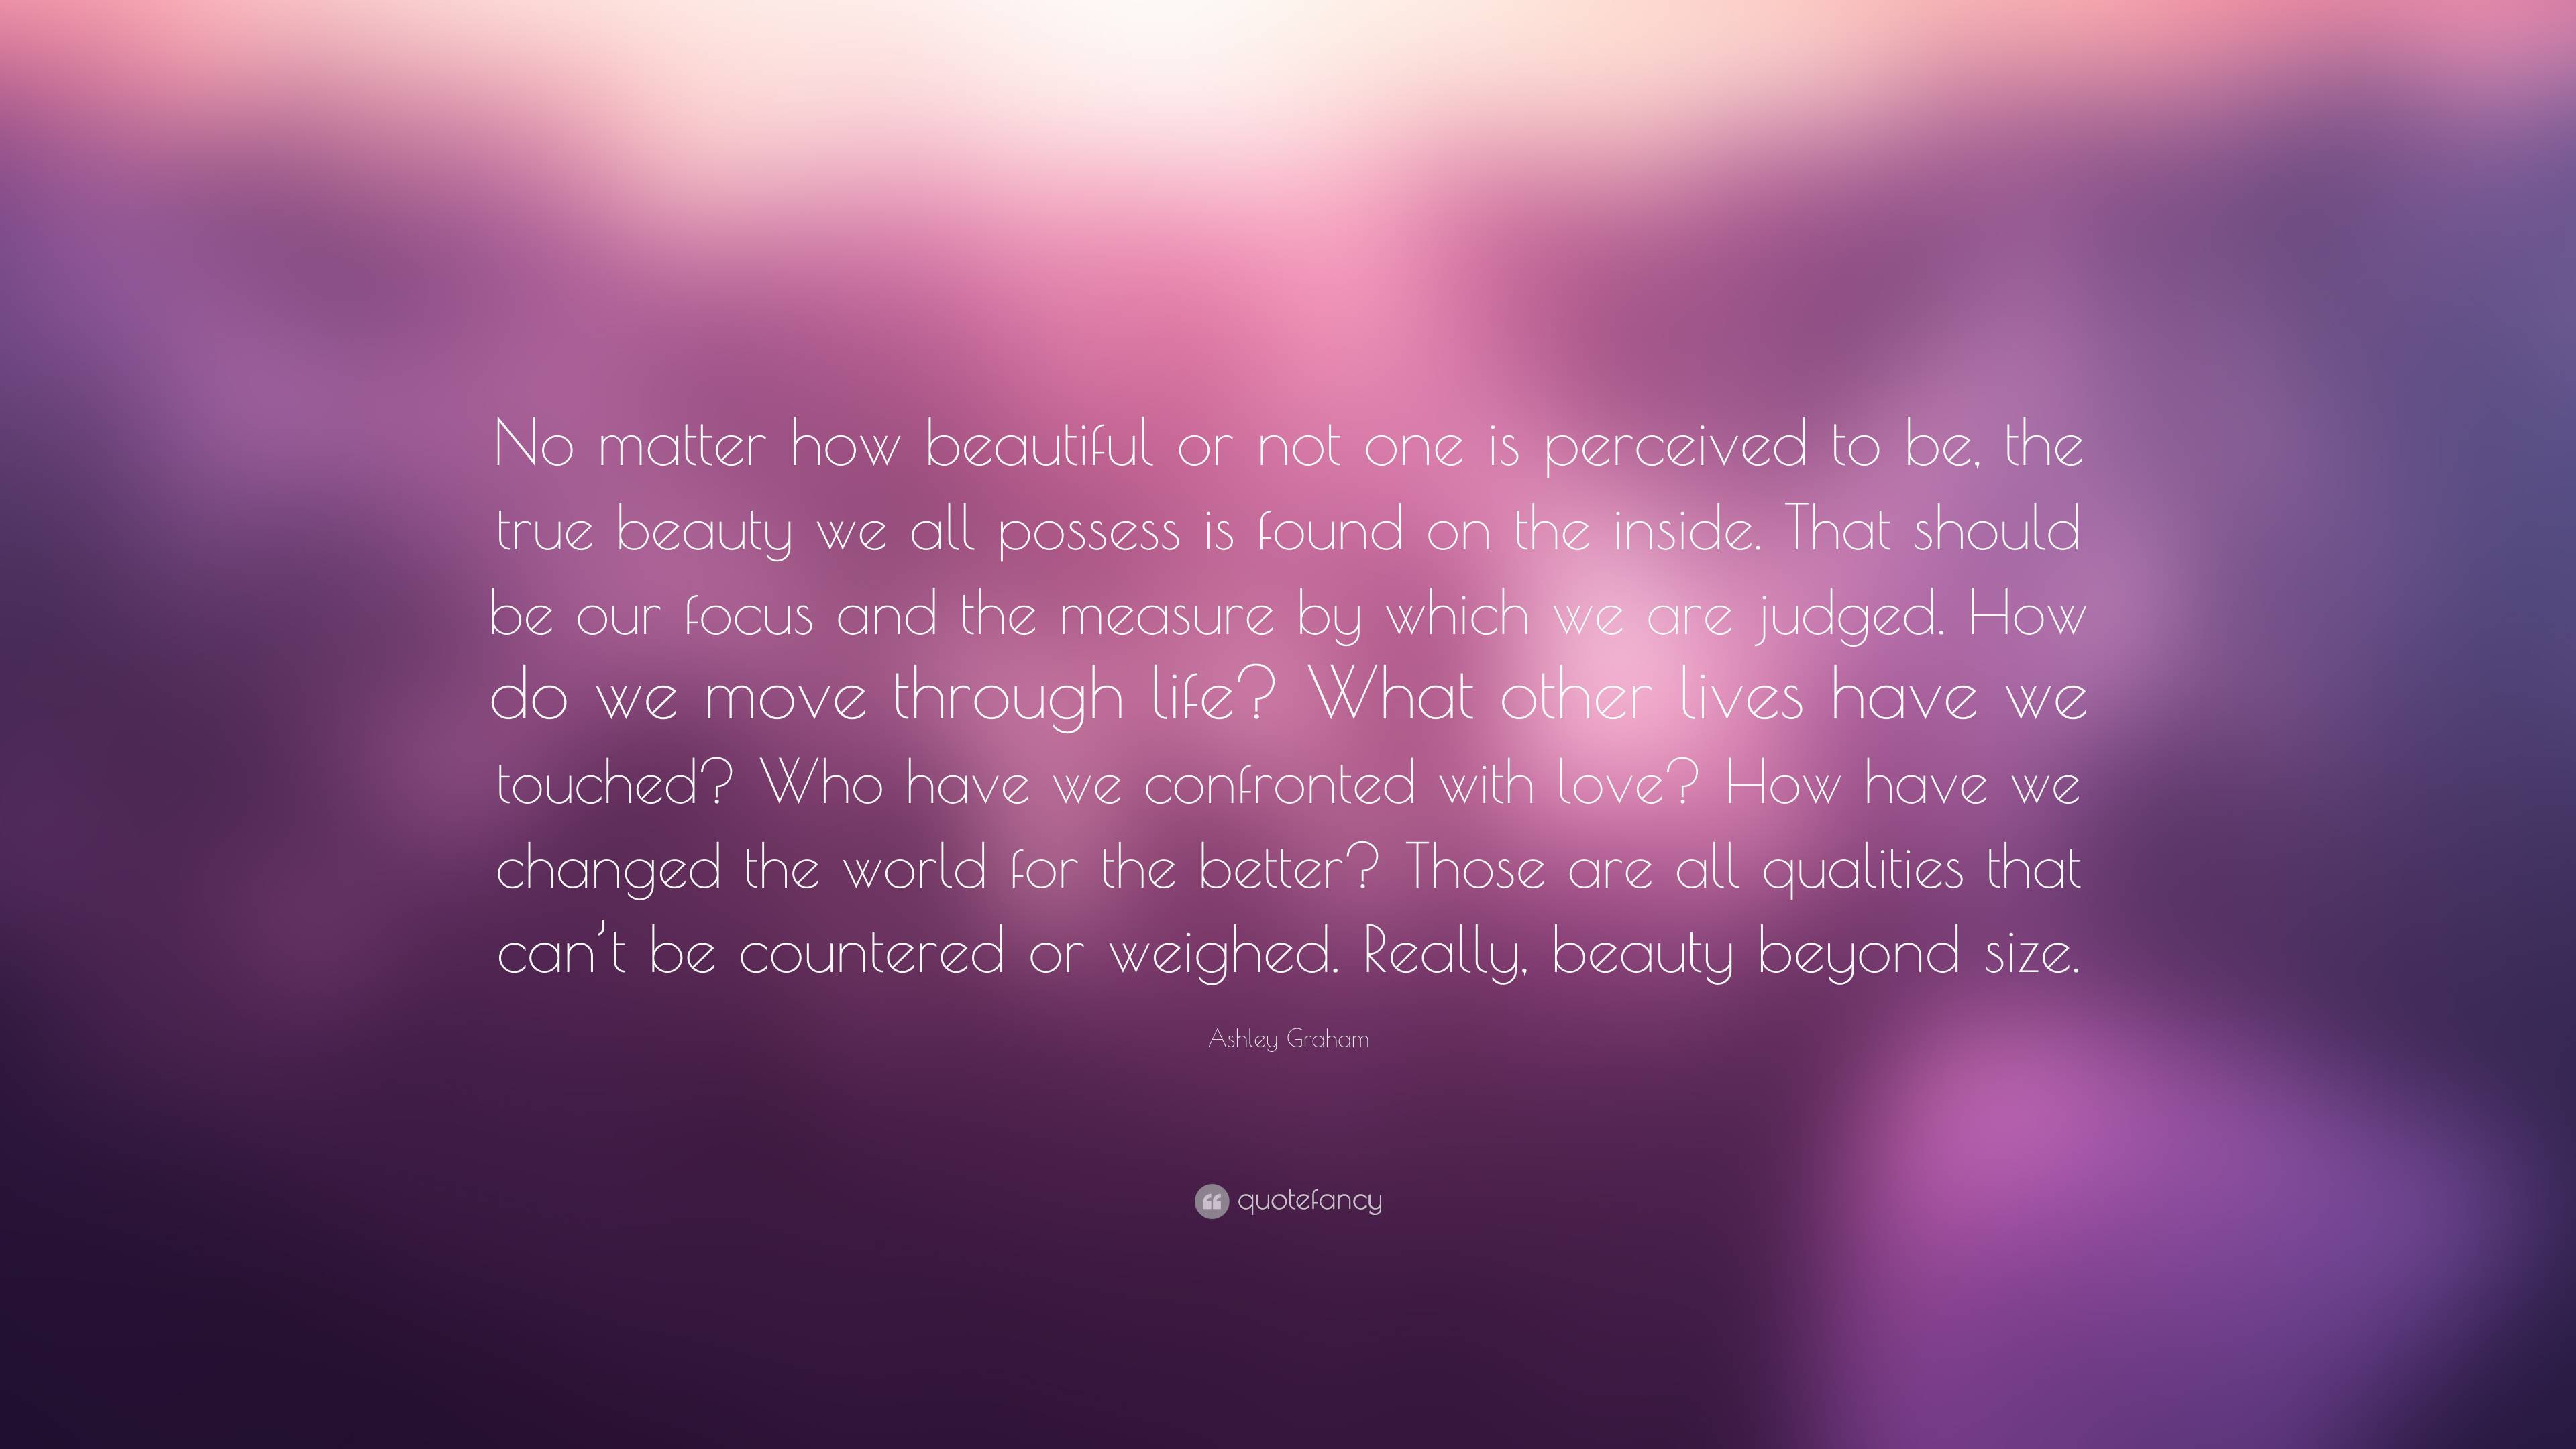 Ashley Graham Quote: “No matter how beautiful or not one is perceived ...